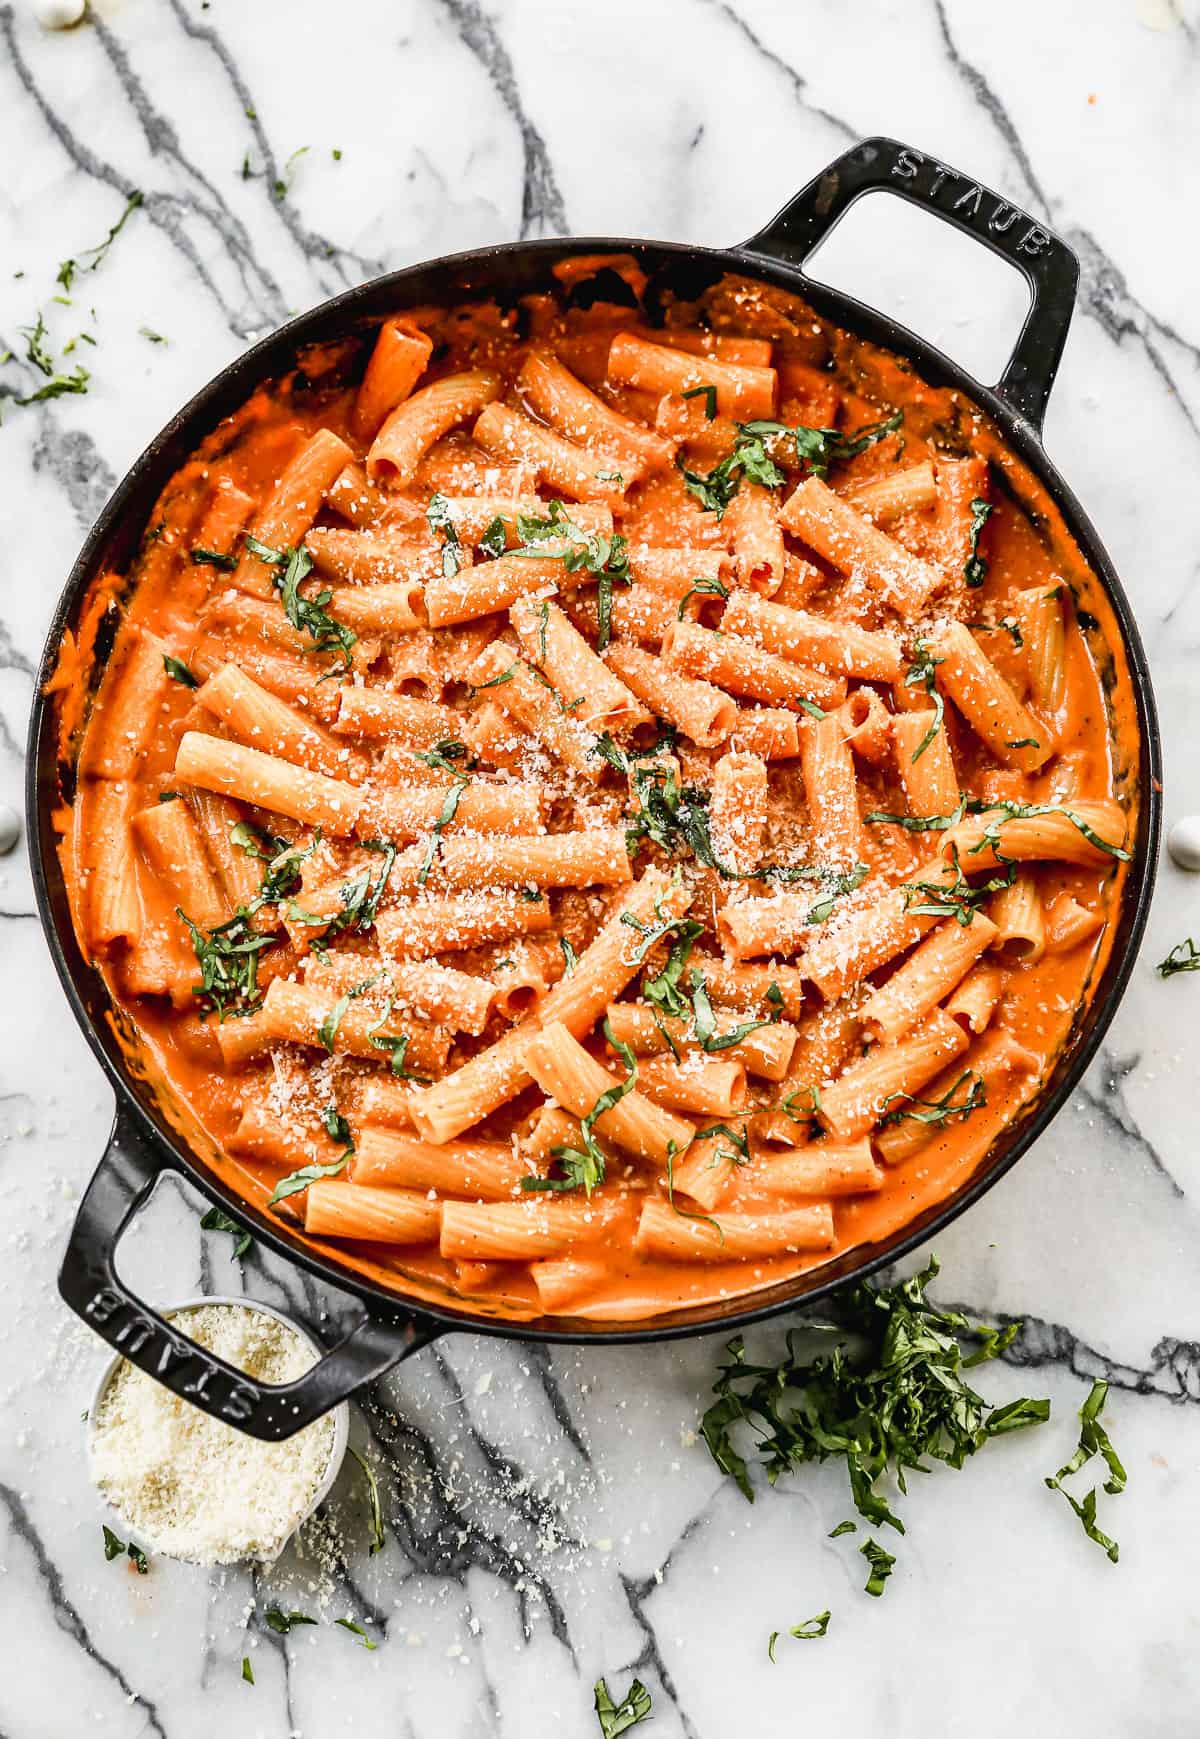 Pink sauce pasta with rigatoni pasta served in a skillet, garnished with fresh basil and parmesan.